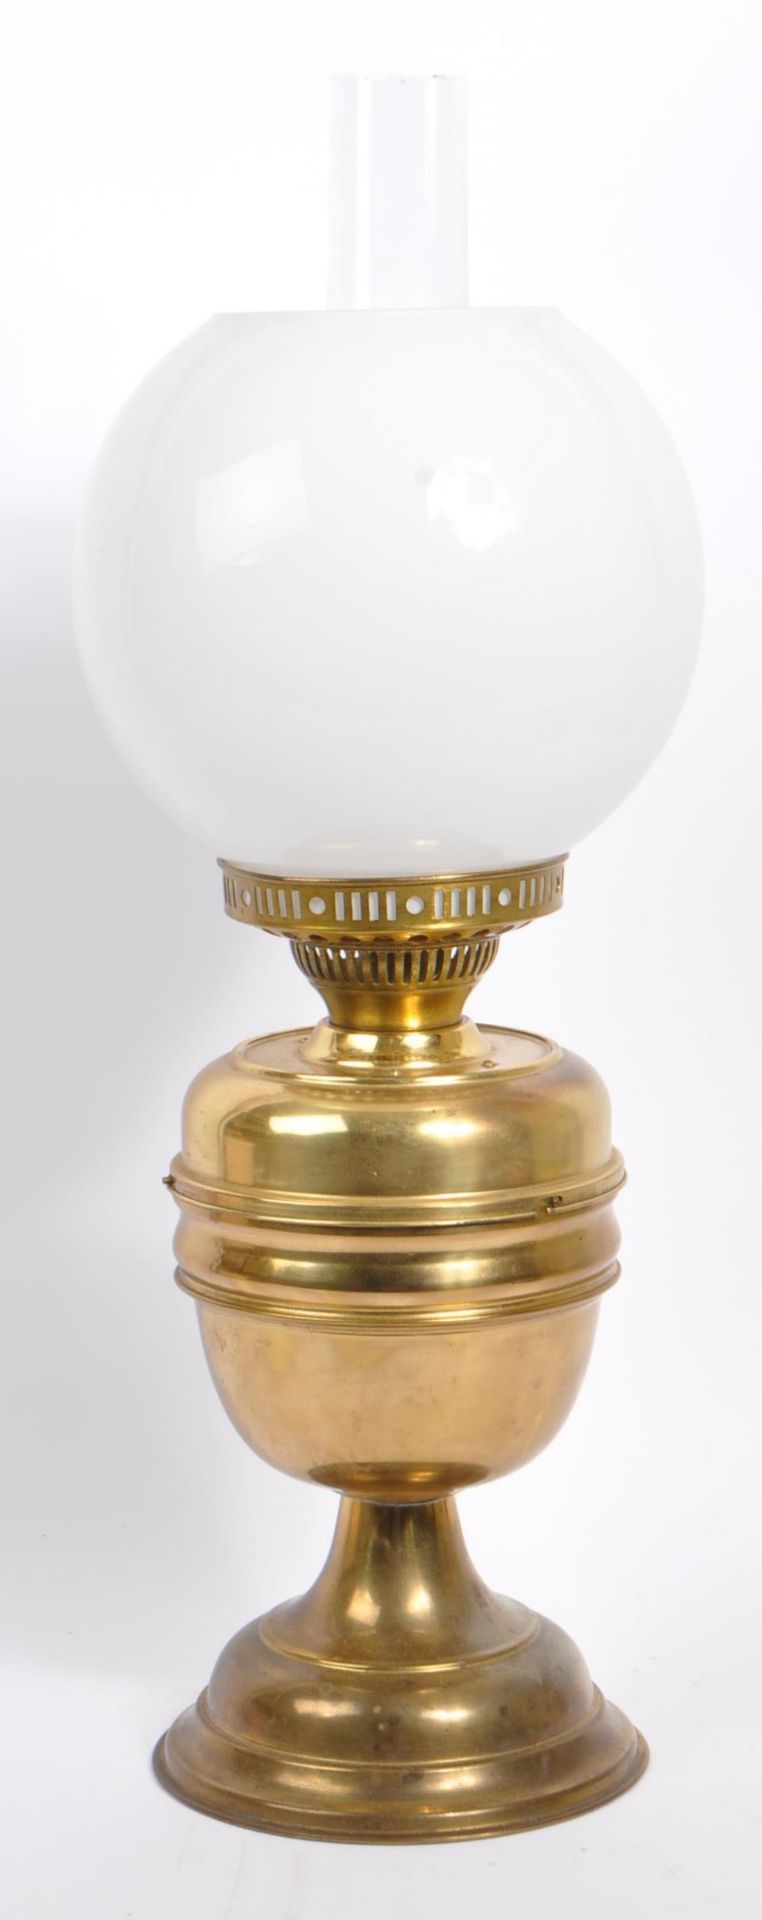 20TH CENTURY BRASS OIL LAMP WITH GLASS SHADE - Image 4 of 4